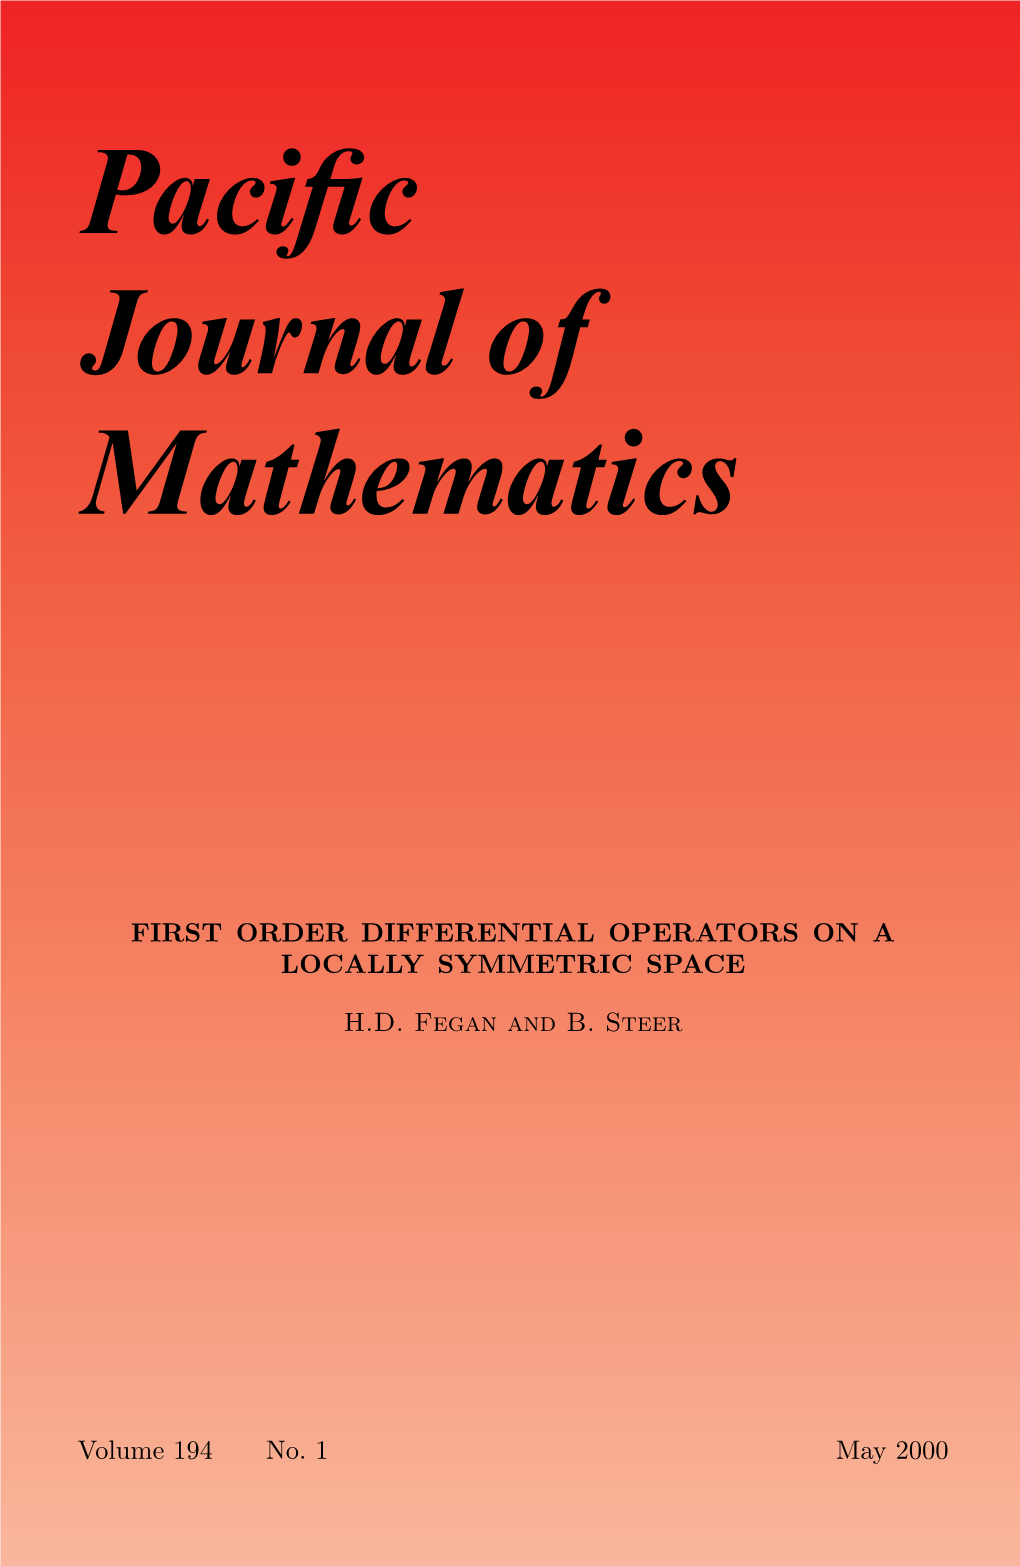 First Order Differential Operators on a Locally Symmetric Space